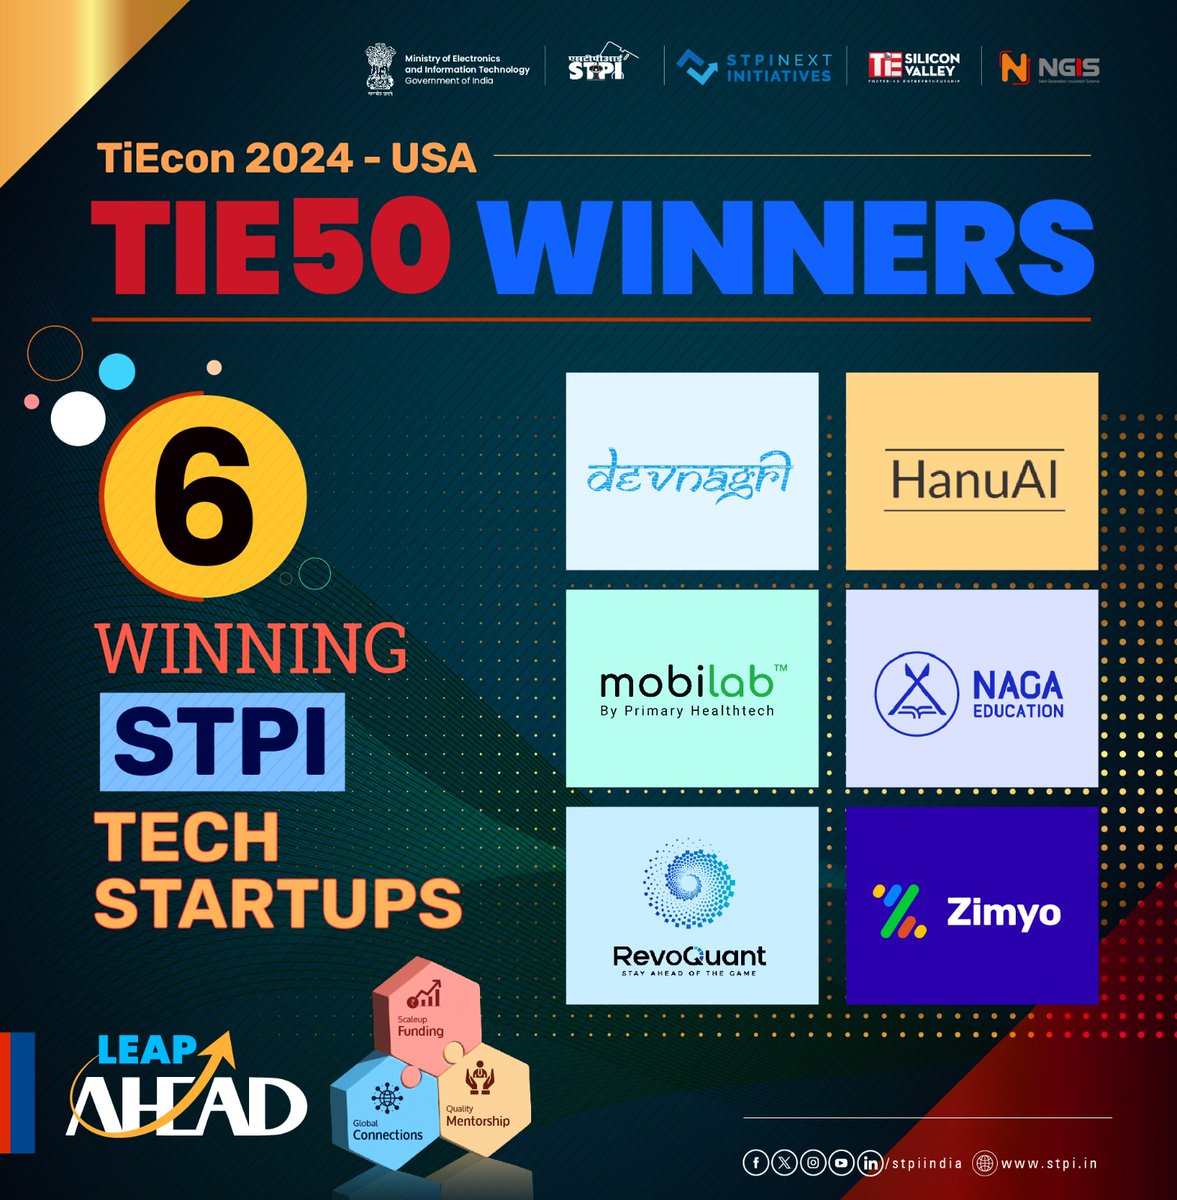 STPI extends its heartiest congratulations to its six tech #startups of LEAP AHEAD 1st cohort, under #NGIS, for winning the prestigious TiE50 Awards, conducted by TiE Silicon Valley. @TheDevnagri @Primary2022 @revoquant @zimyo_official @roadathena @tiesv